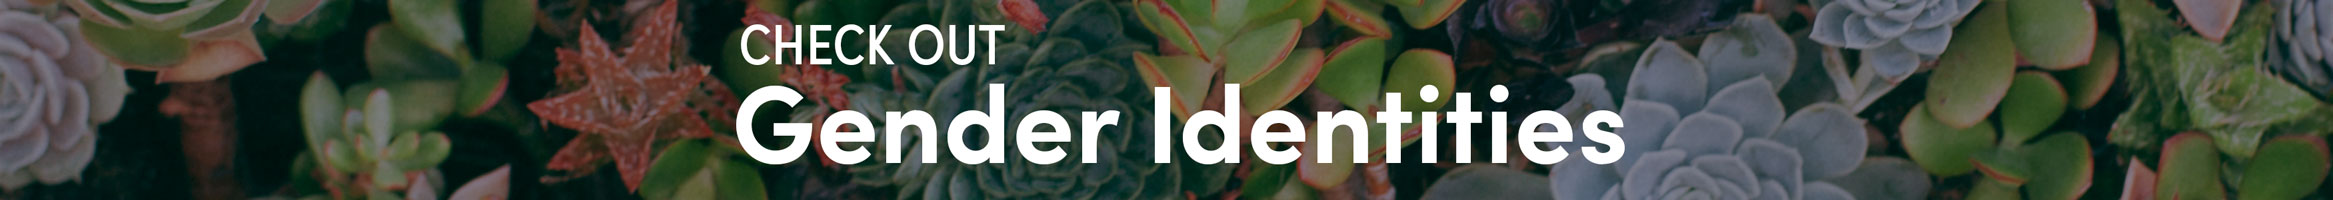 Text reading 'Check out Gender Identities' in front a large group of succulents